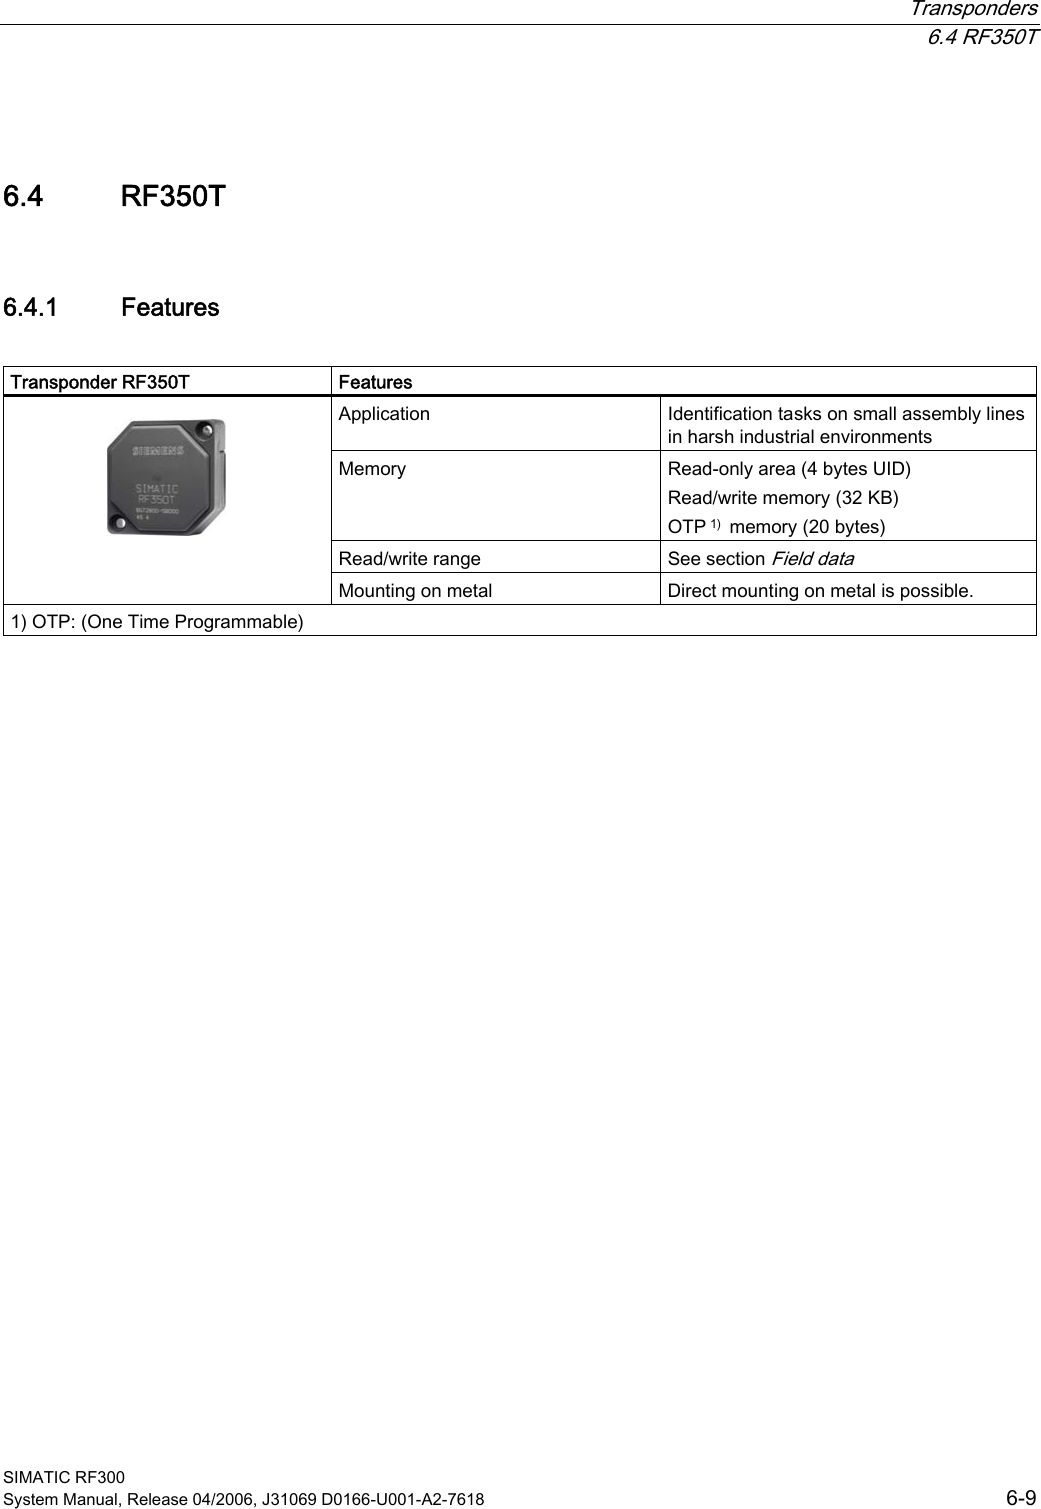  Transponders  6.4 RF350T SIMATIC RF300 System Manual, Release 04/2006, J31069 D0166-U001-A2-7618  6-9 6.4 6.4 RF350T 6.4.1  Features  Transponder RF350T  Features Application  Identification tasks on small assembly lines in harsh industrial environments Memory  Read-only area (4 bytes UID)  Read/write memory (32 KB)  OTP 1)  memory (20 bytes) Read/write range  See section Field data    Mounting on metal  Direct mounting on metal is possible. 1) OTP: (One Time Programmable)  